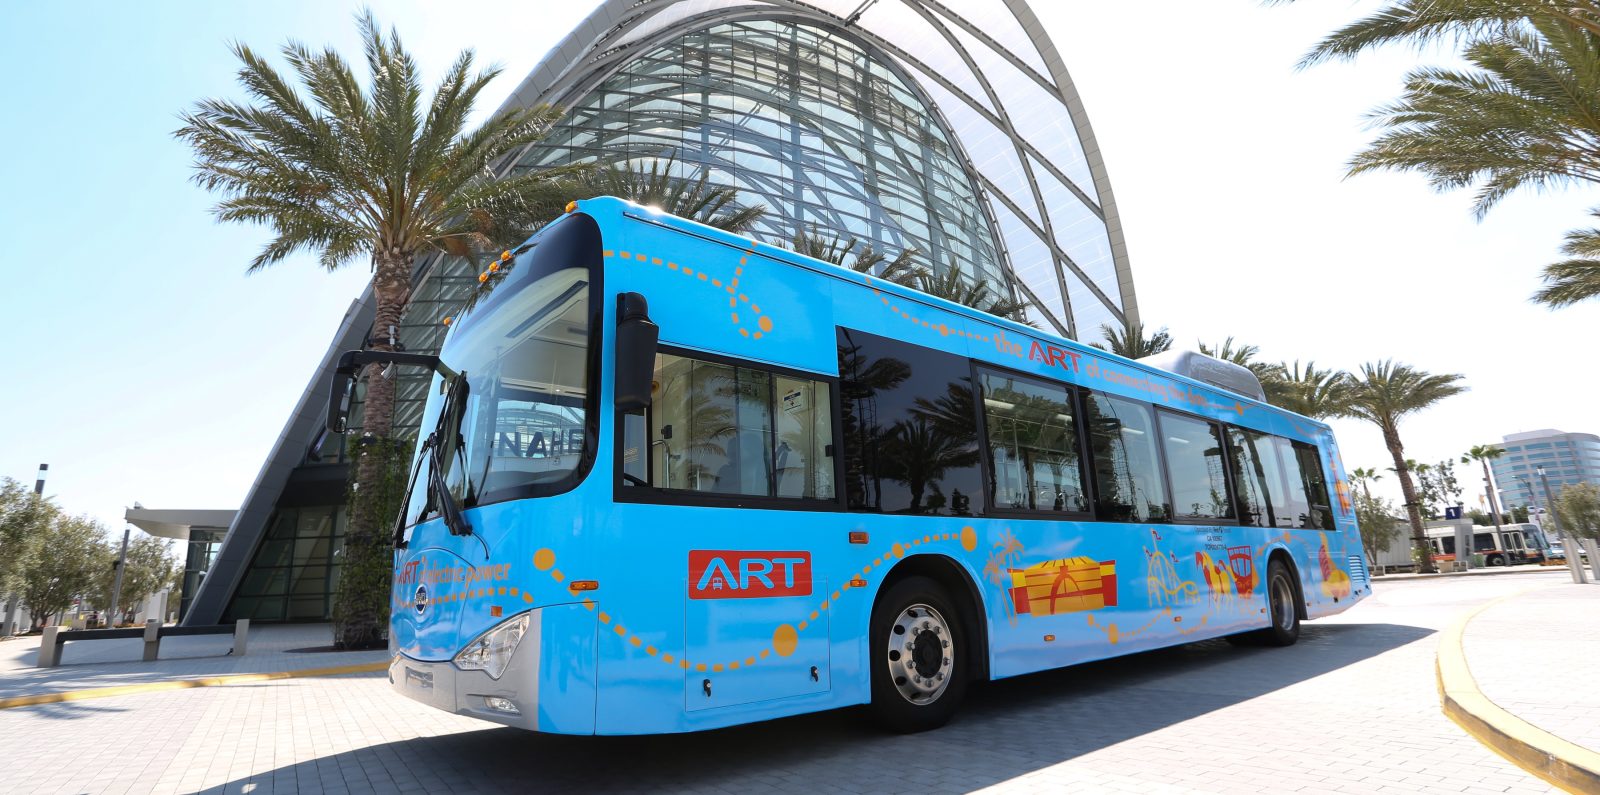 Anaheim is getting 40 new all-electric buses